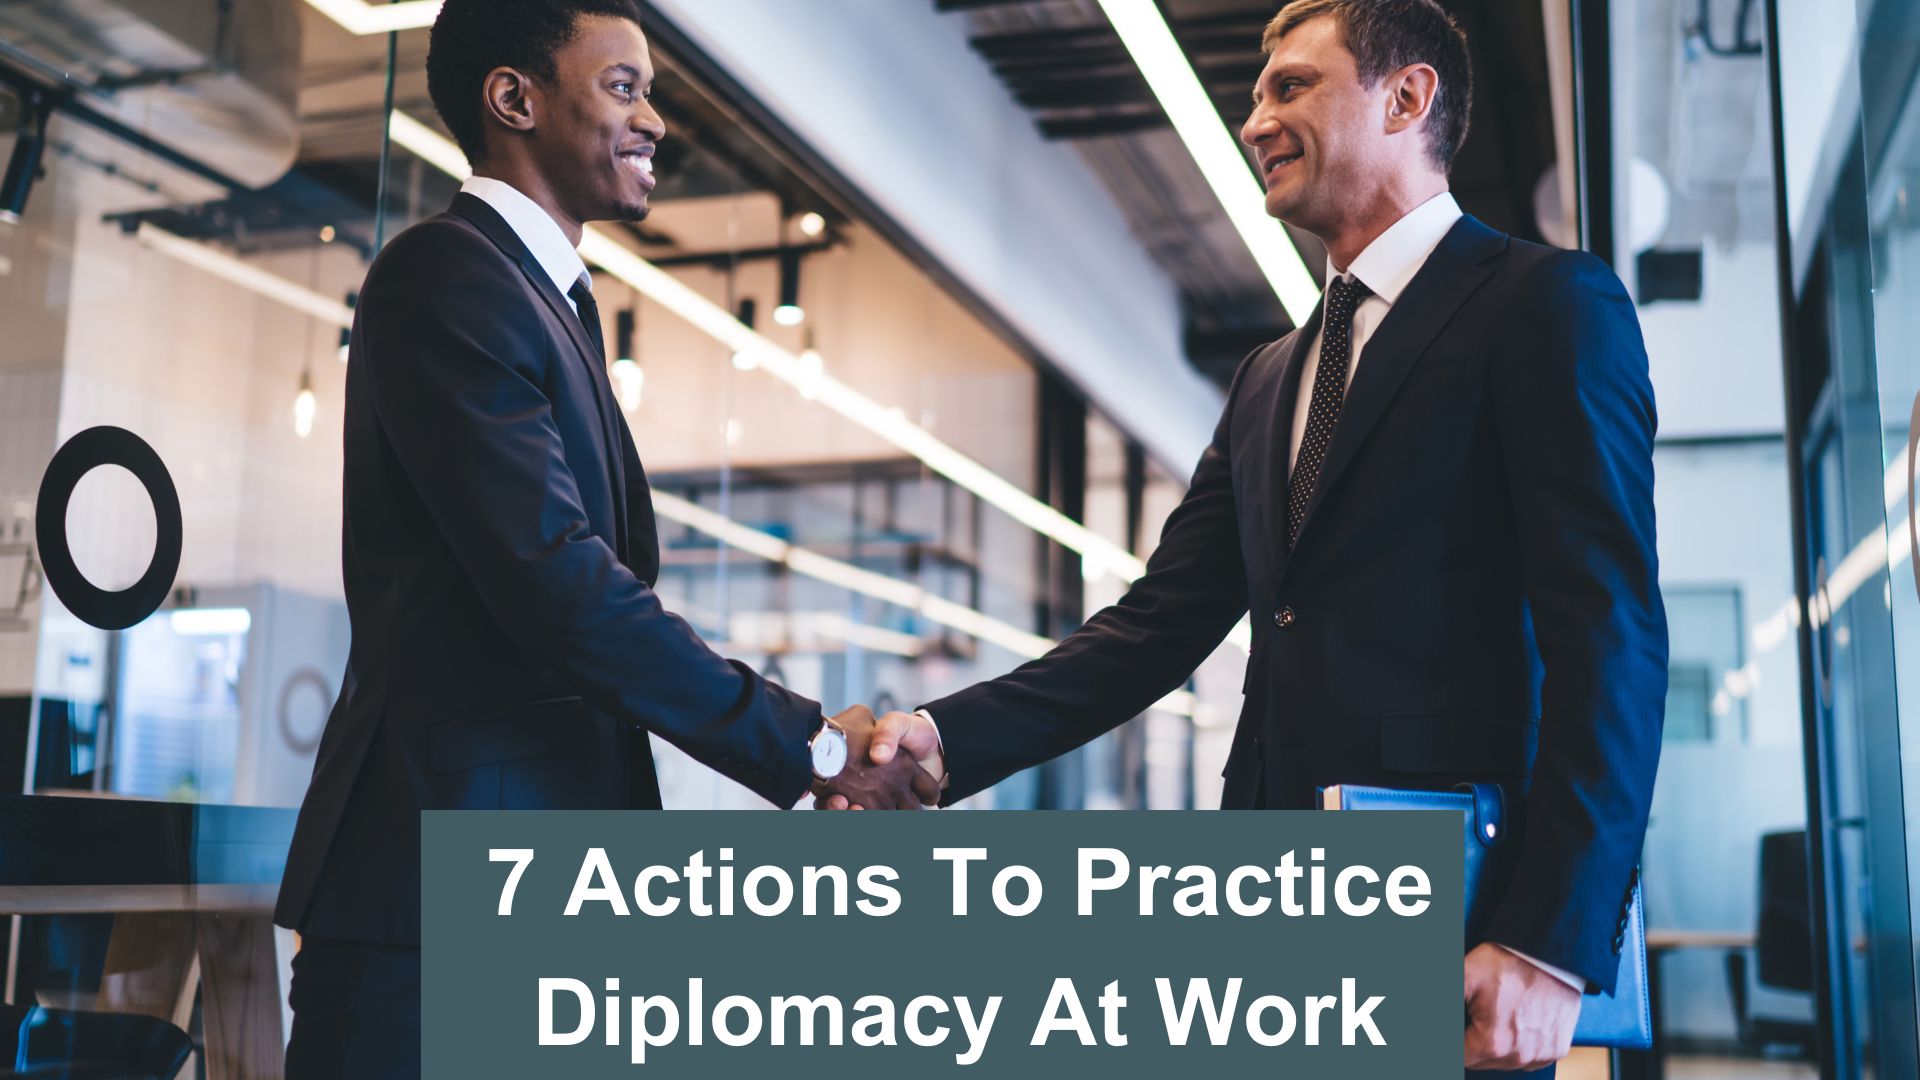 7 Actions To Practice Diplomacy At Work